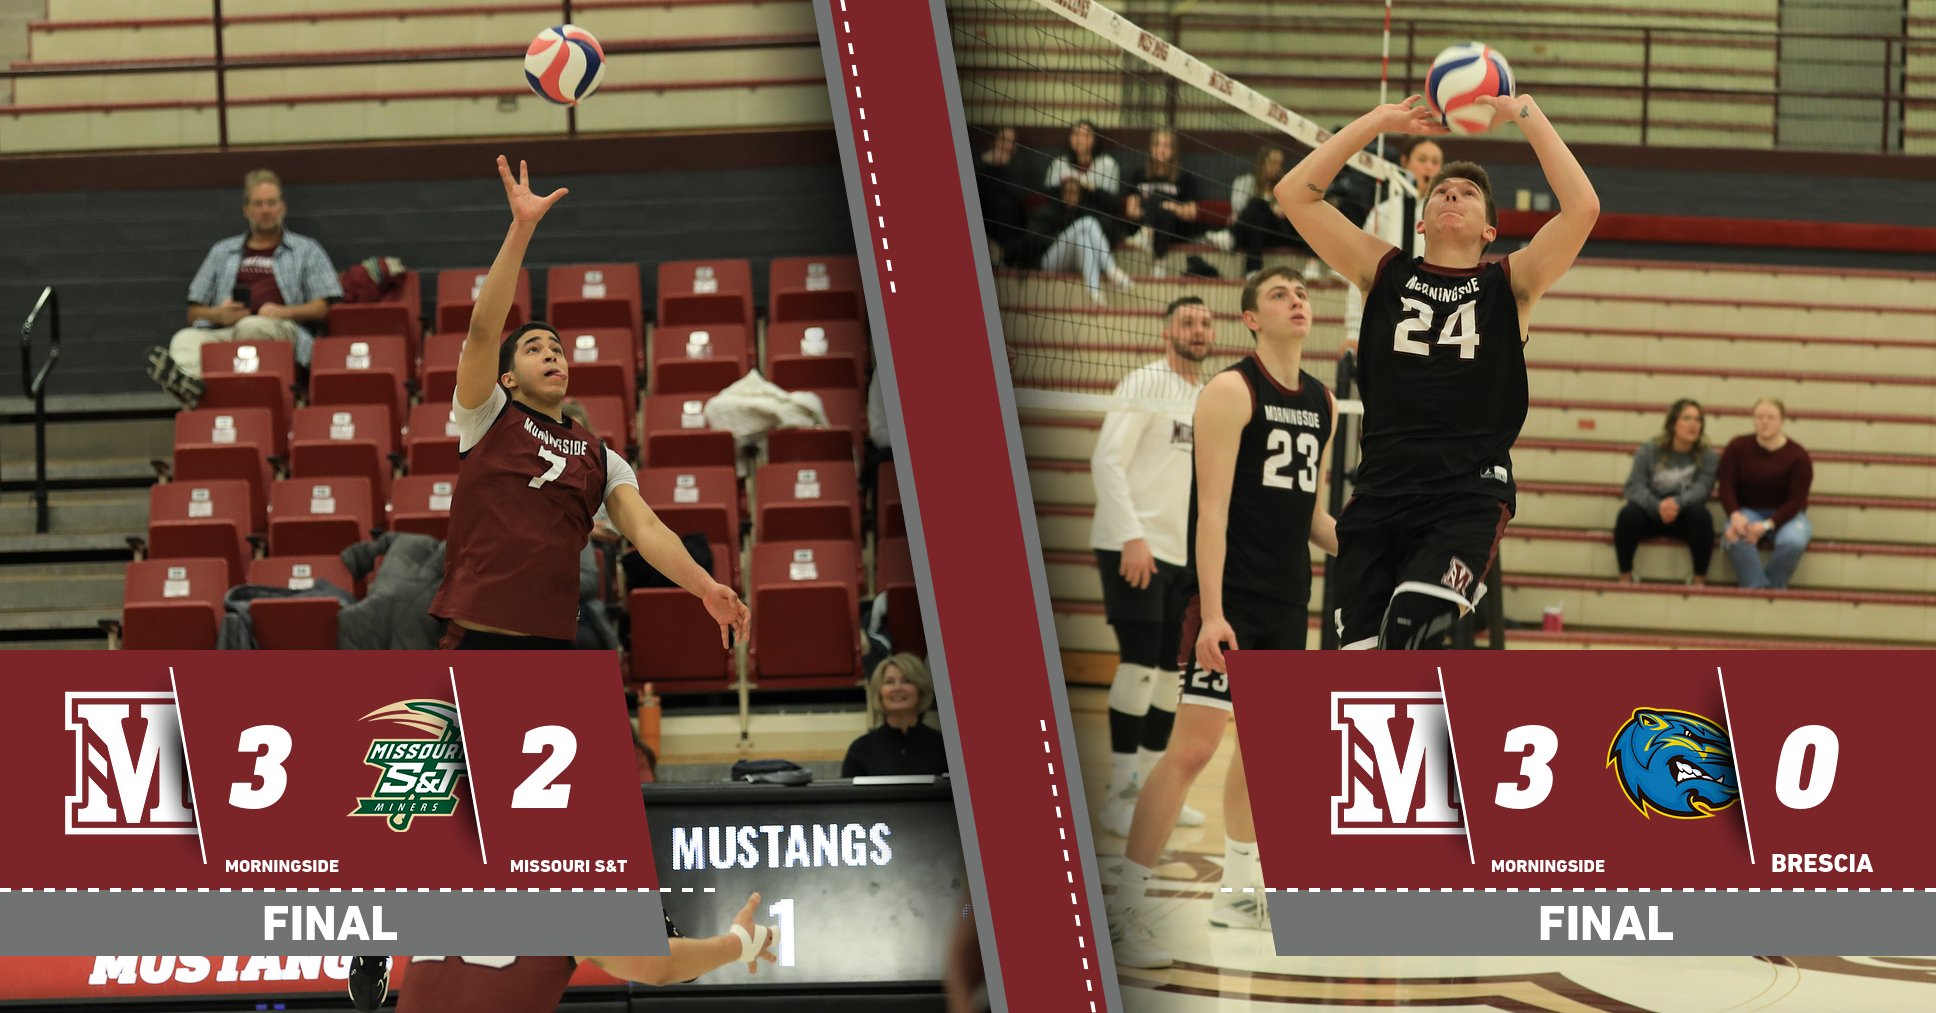 Strong offense leads to a pair of Mustang victories to start the season